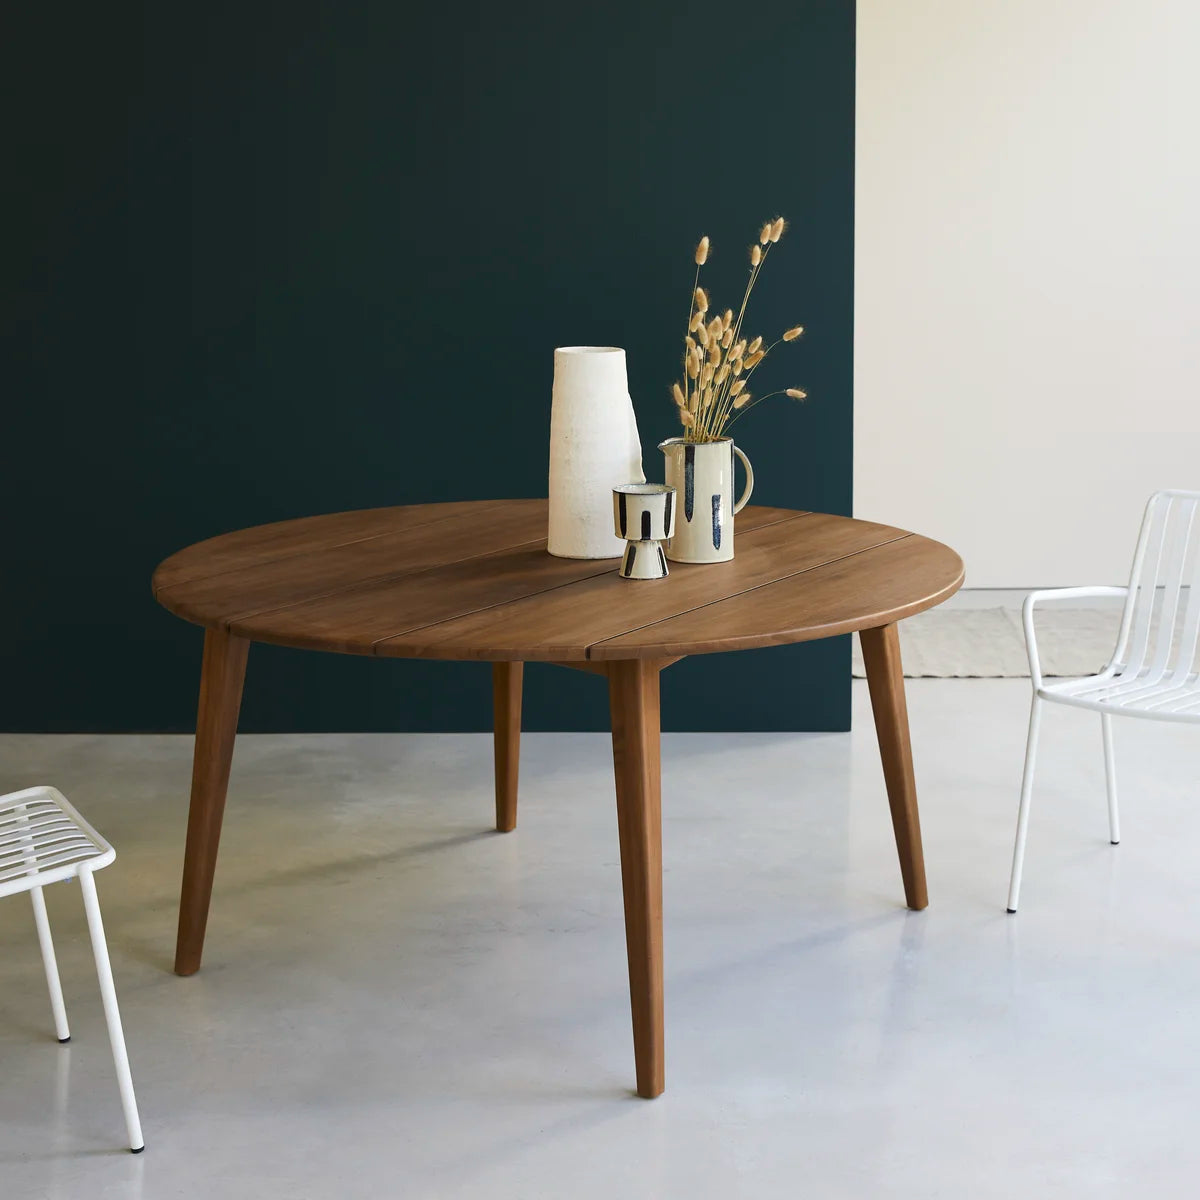 Grasshopper - Solid Wood Table